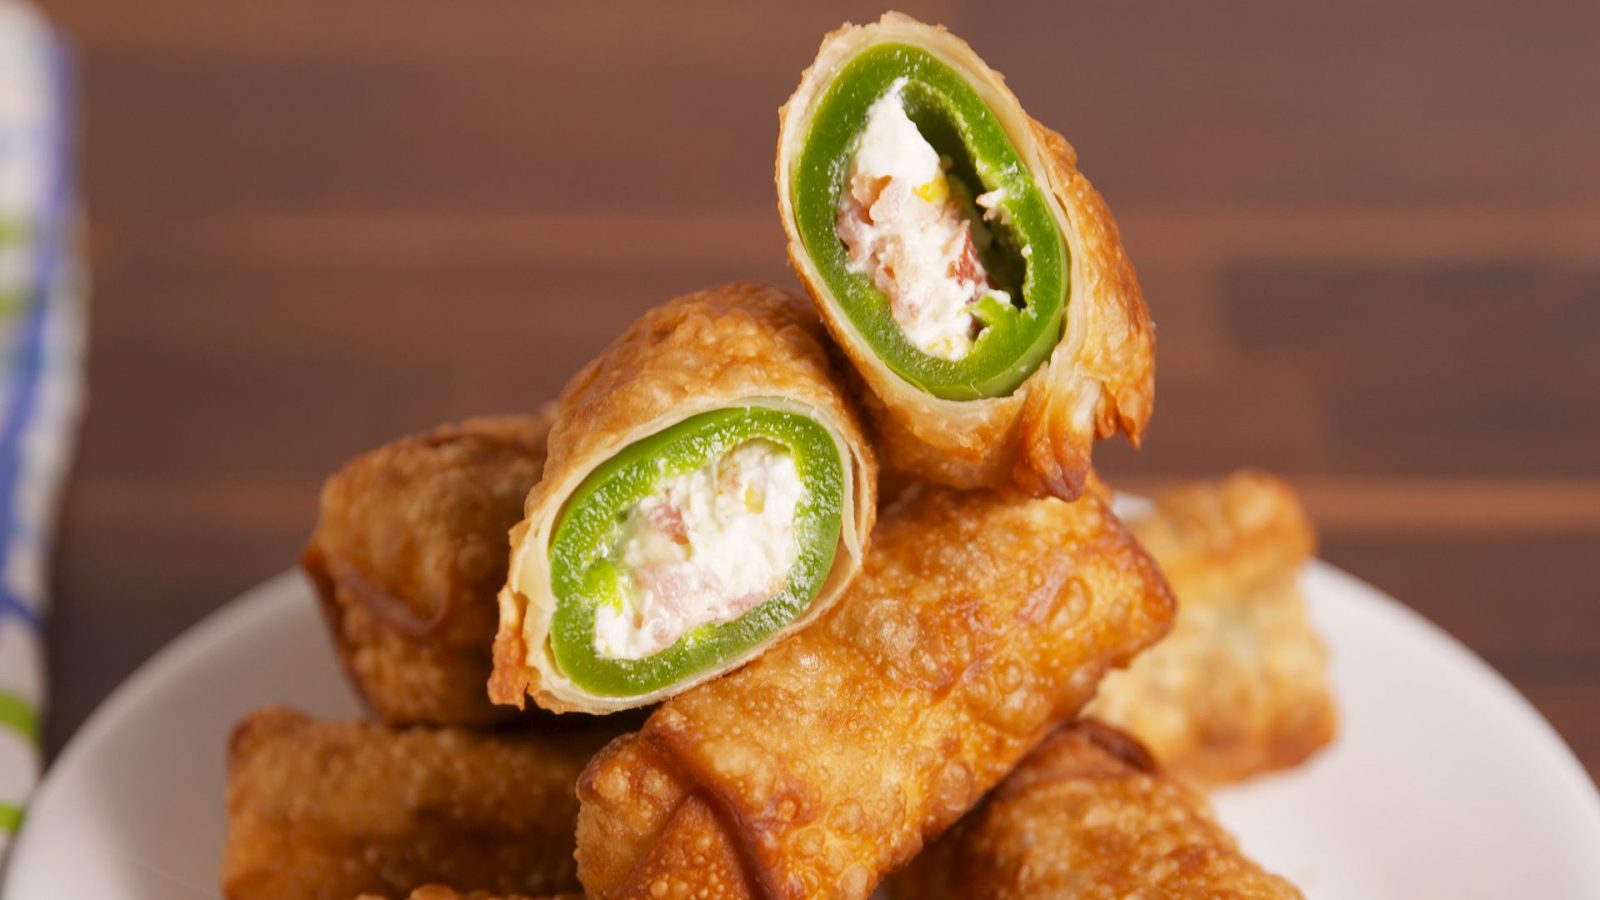 🌶 Only a Person Who Can Handle the Heat Will Have Eaten 13/25 of These Spicy Foods Jalapeño Poppers